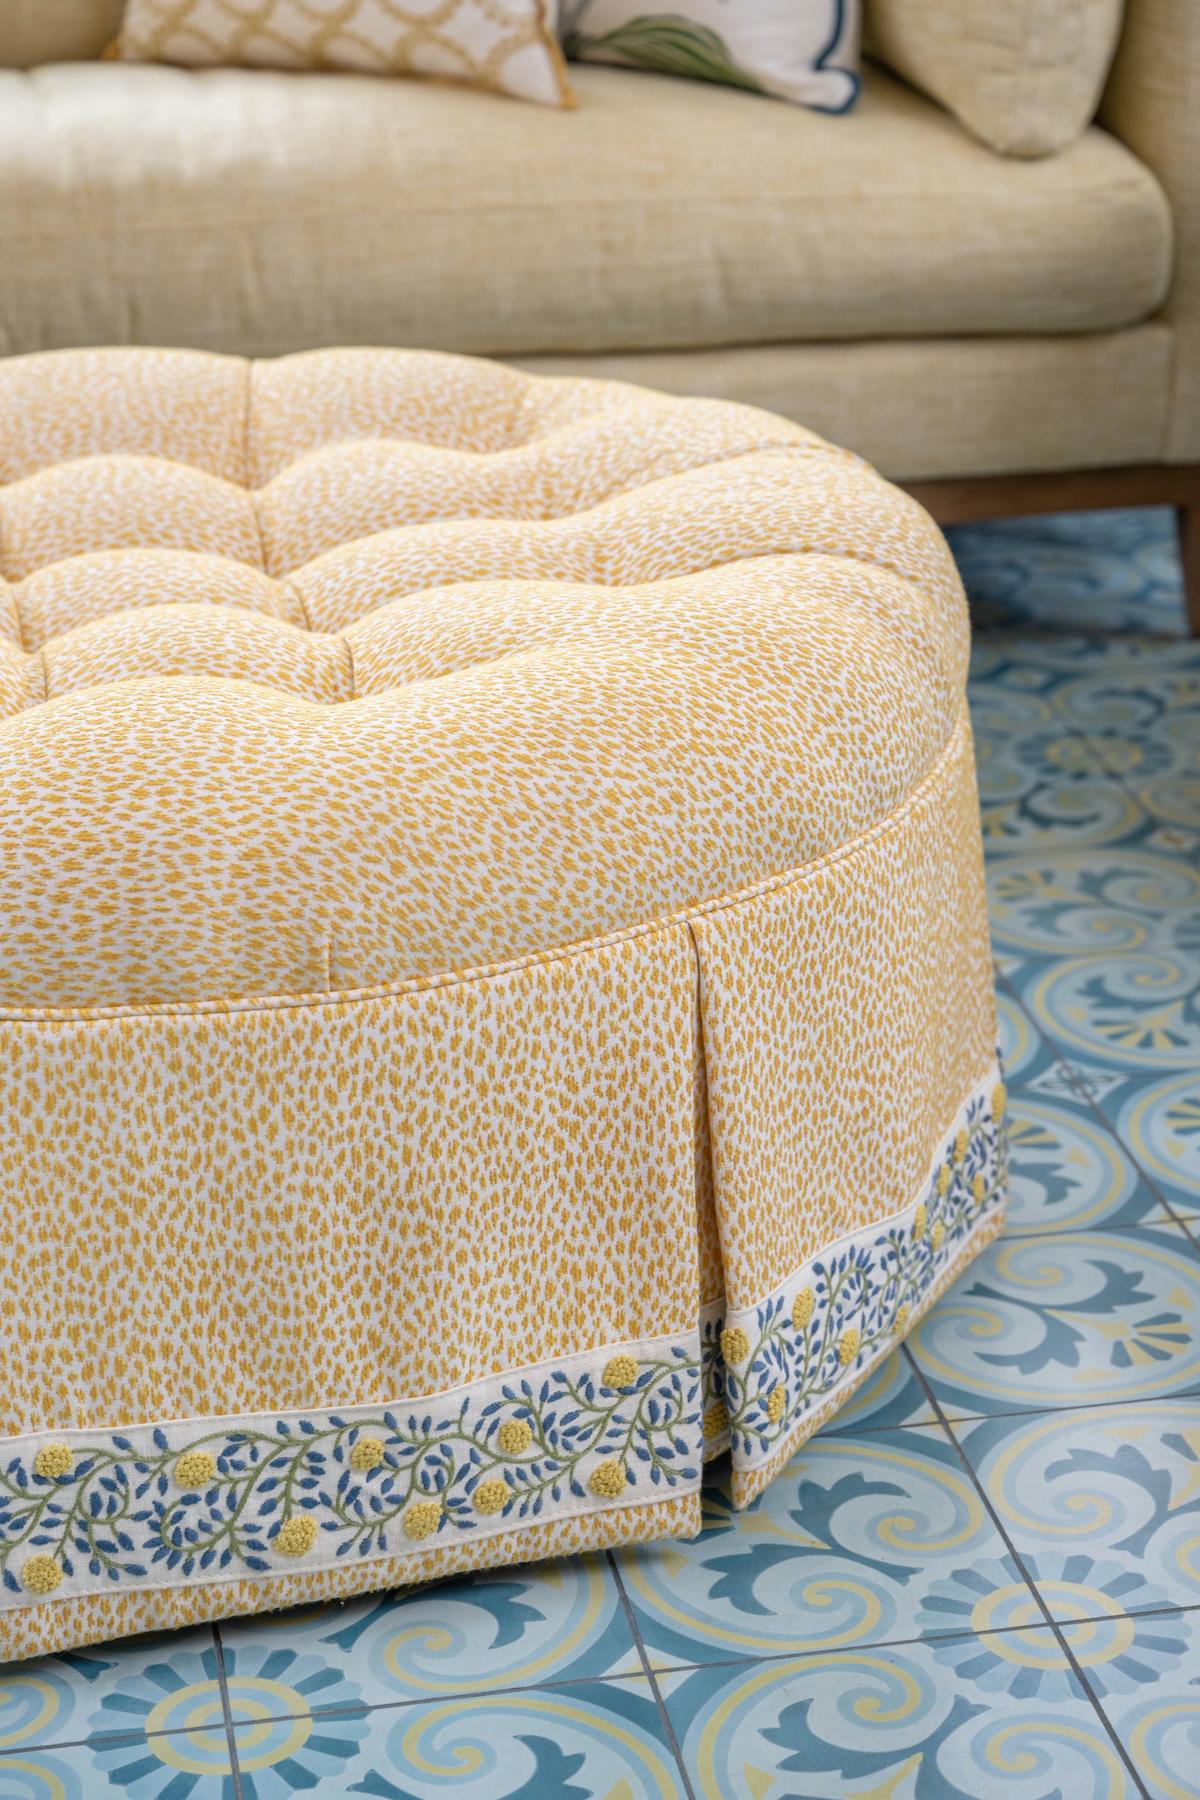 This ottoman features tape trim, a powerful detail that helps pull the space together. (Handout/TNS)